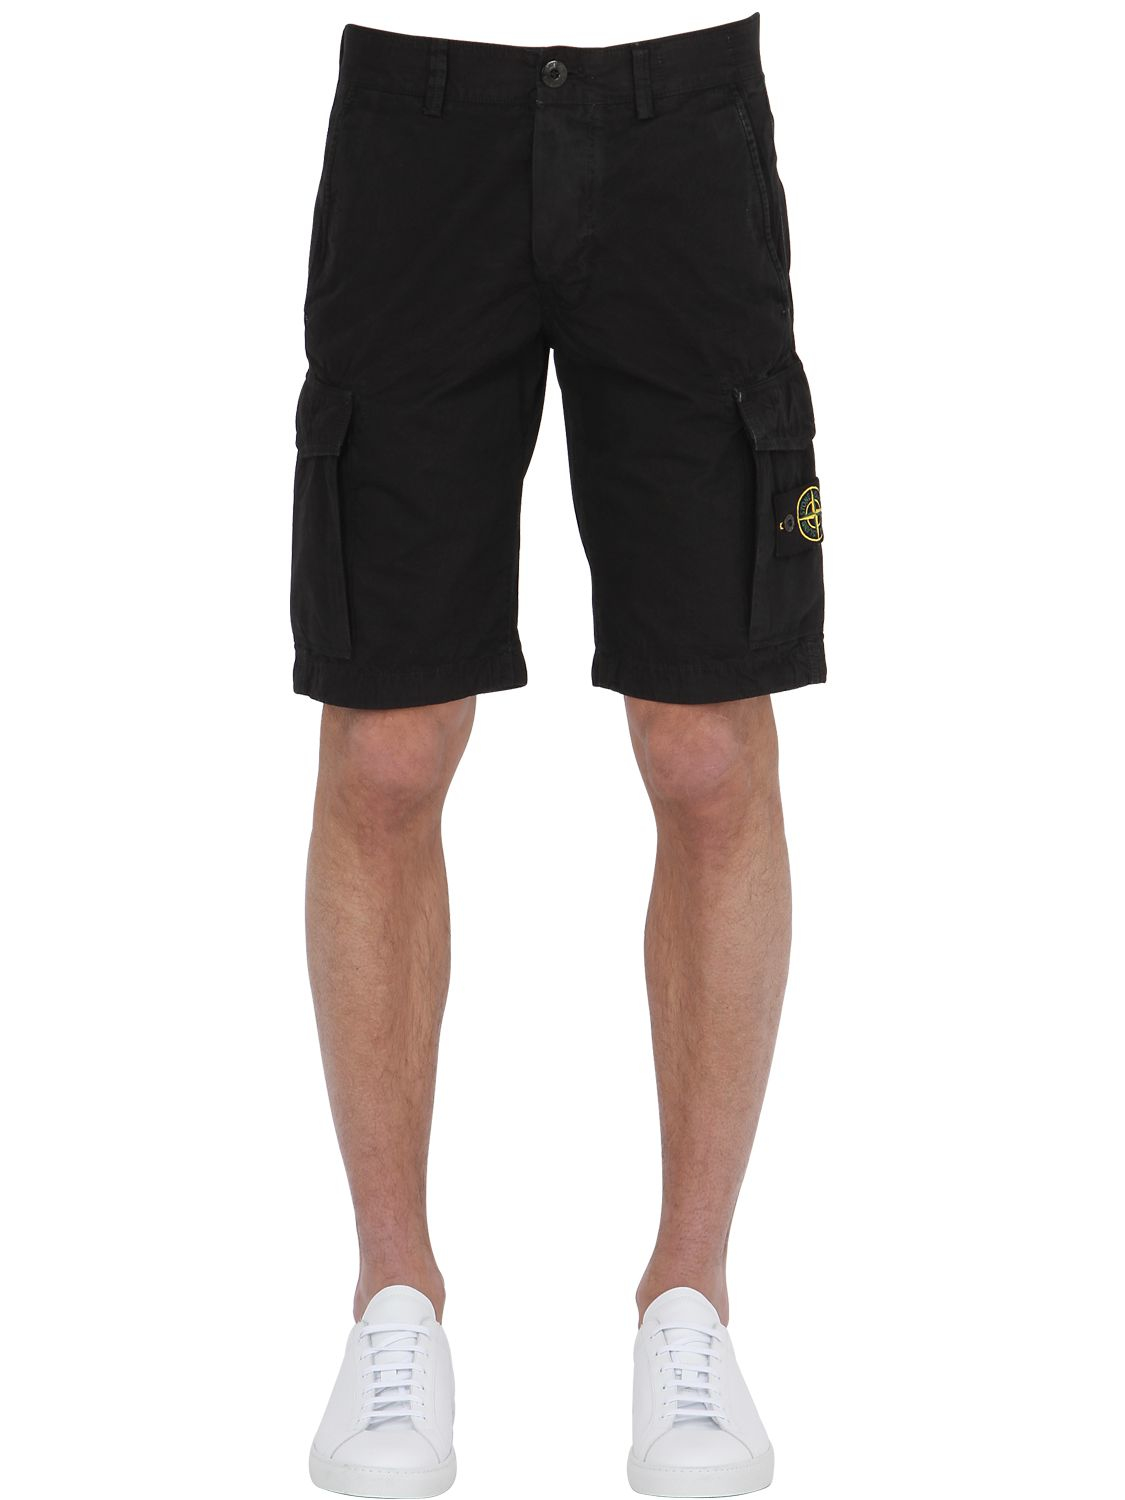 Stone Island Brushed Cotton Canvas Cargo Shorts in Black for Men - Lyst